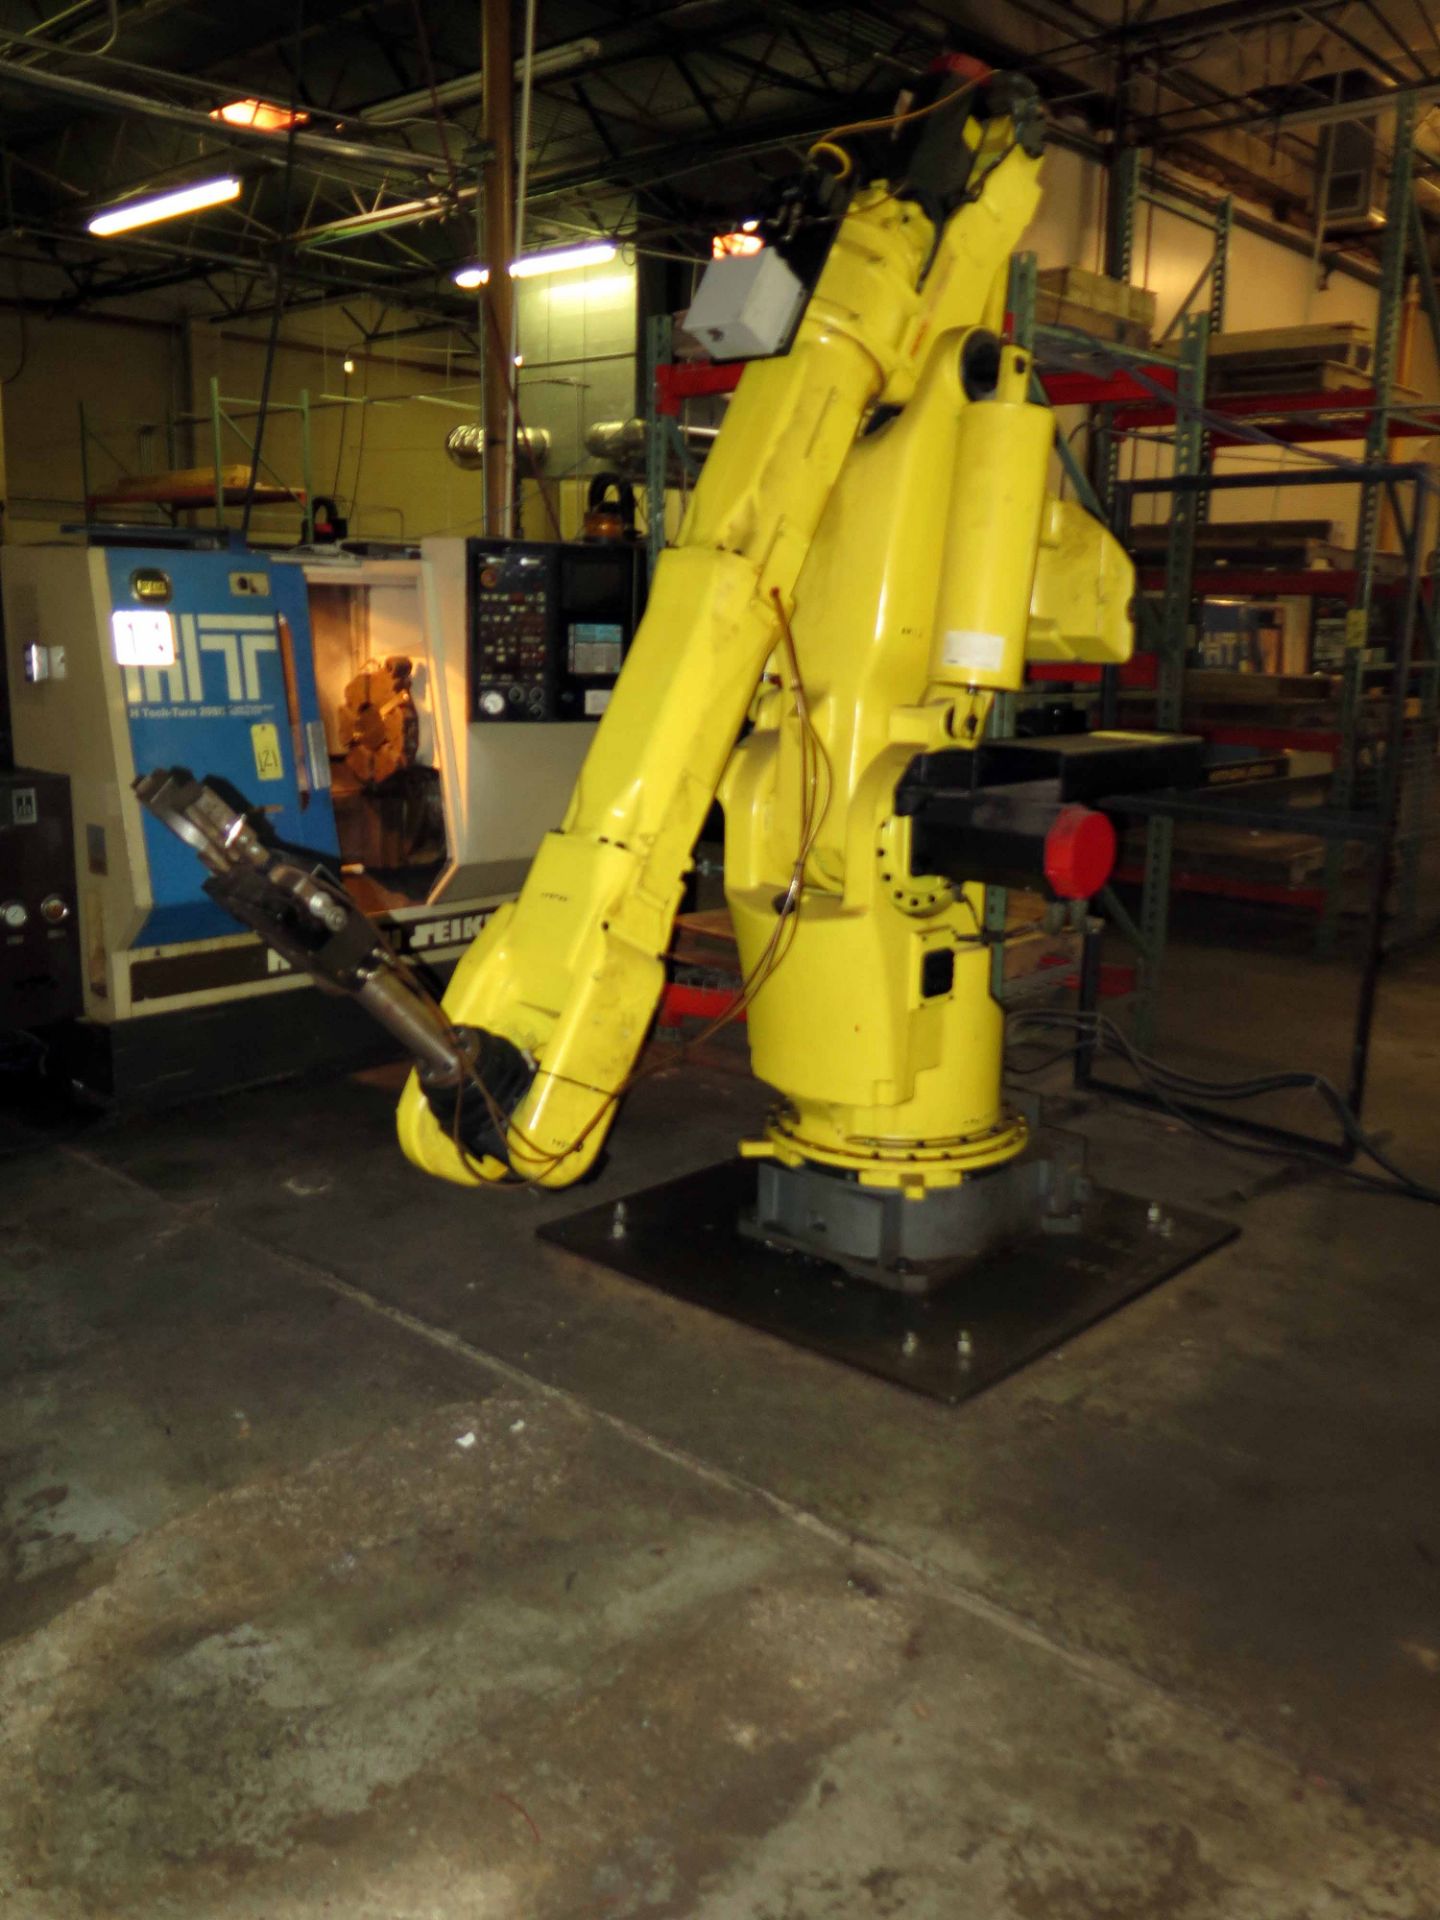 6-AXIS ROBOT, FANUC S-420iF, 264 lb. payload, 112.2" high reach, end effector, S/N E98506940